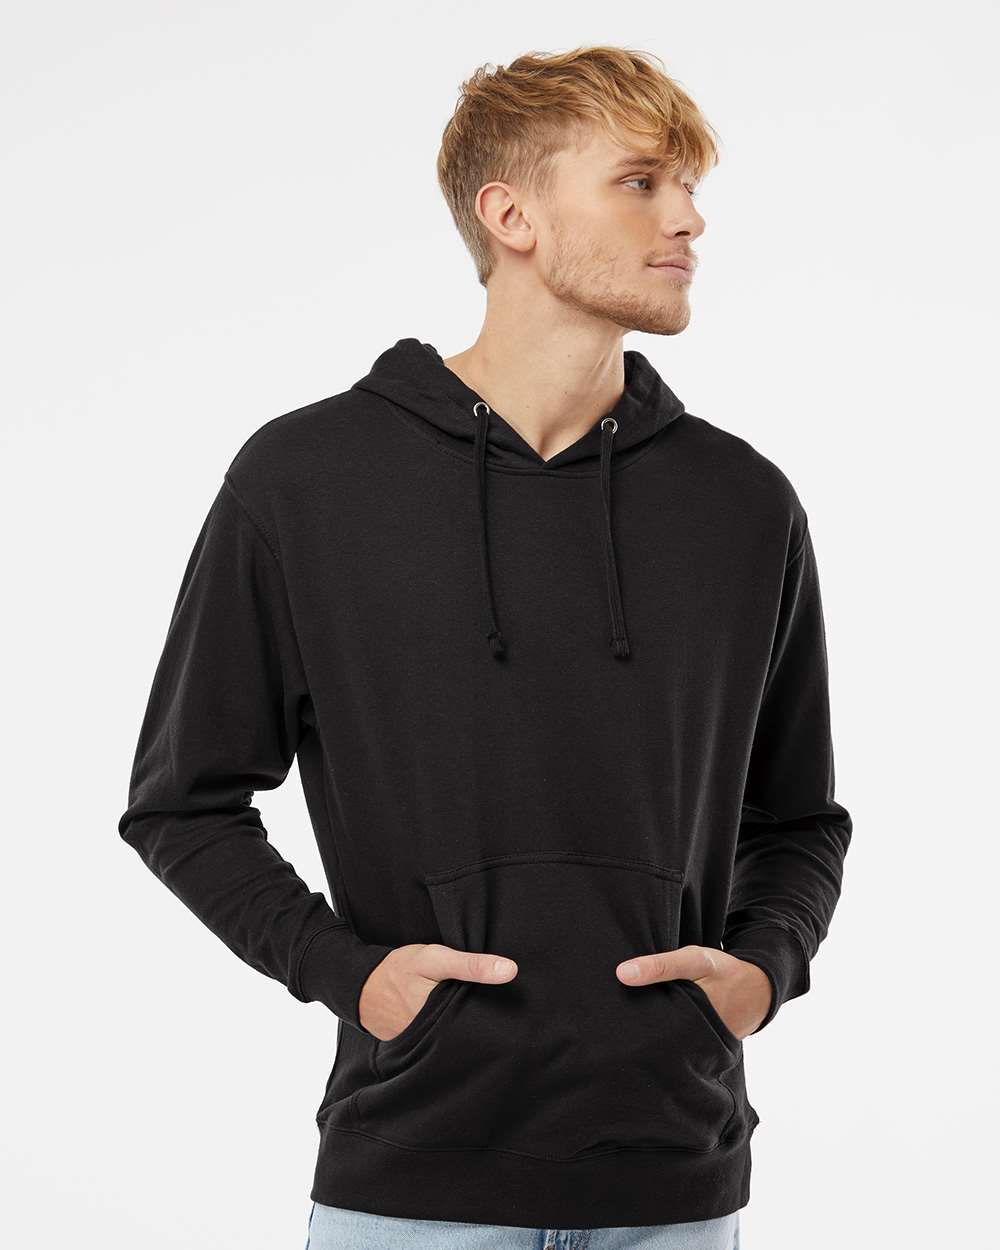 Independent Trading Co. Midweight Hooded Sweatshirt SS4500 #colormdl_Black